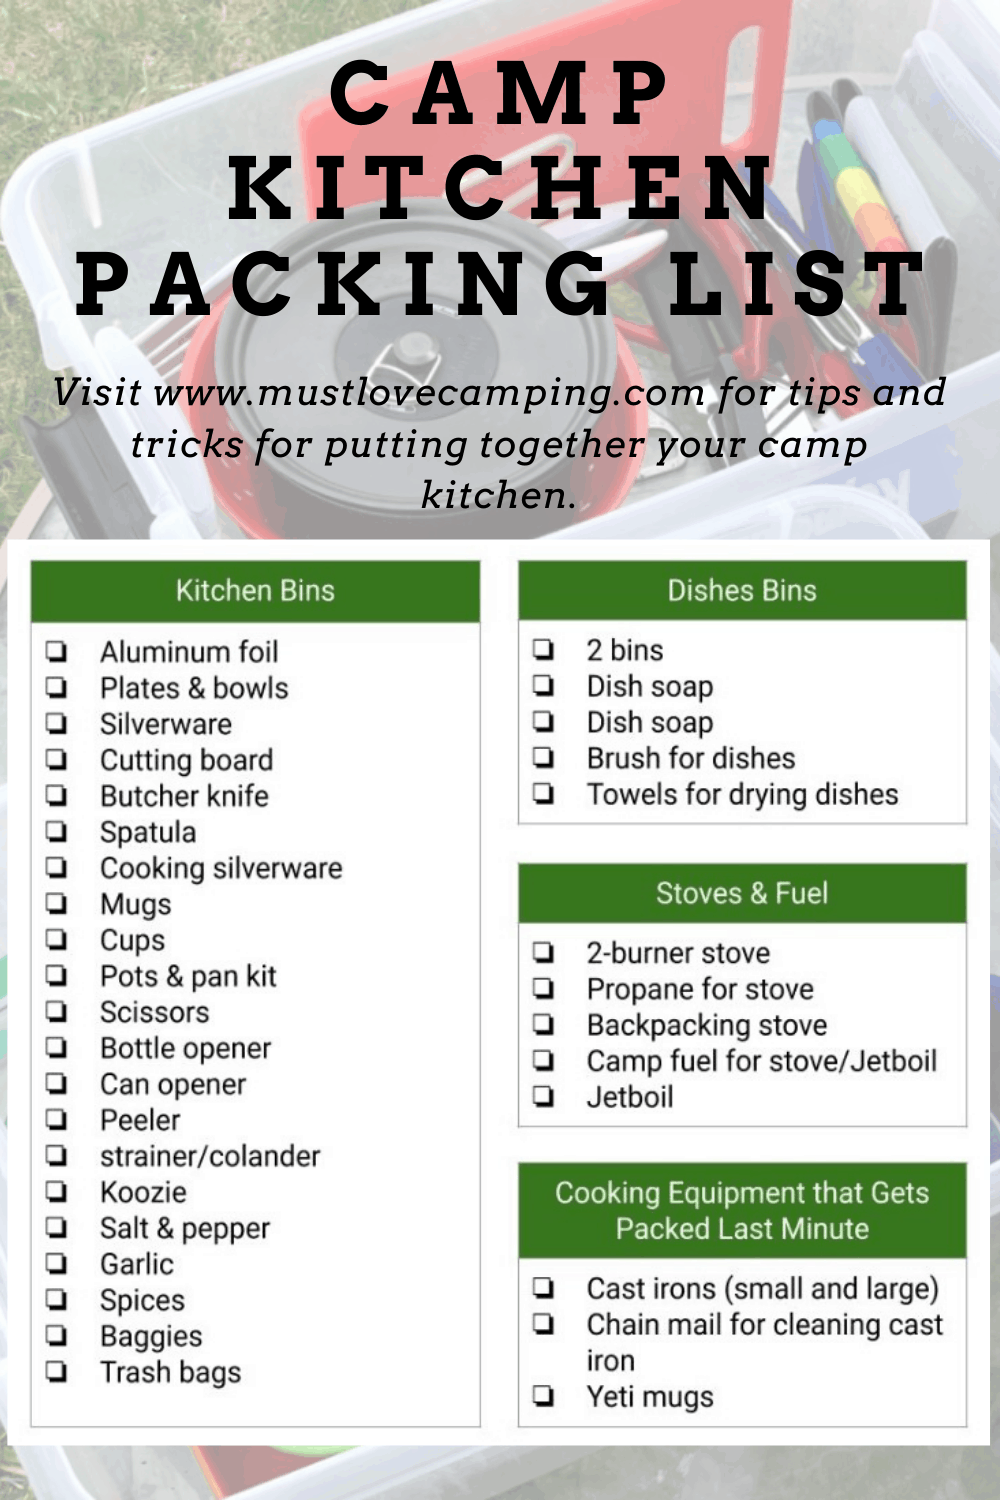 Your Camping Supplies Checklist: Everything You Need to Bring Camping